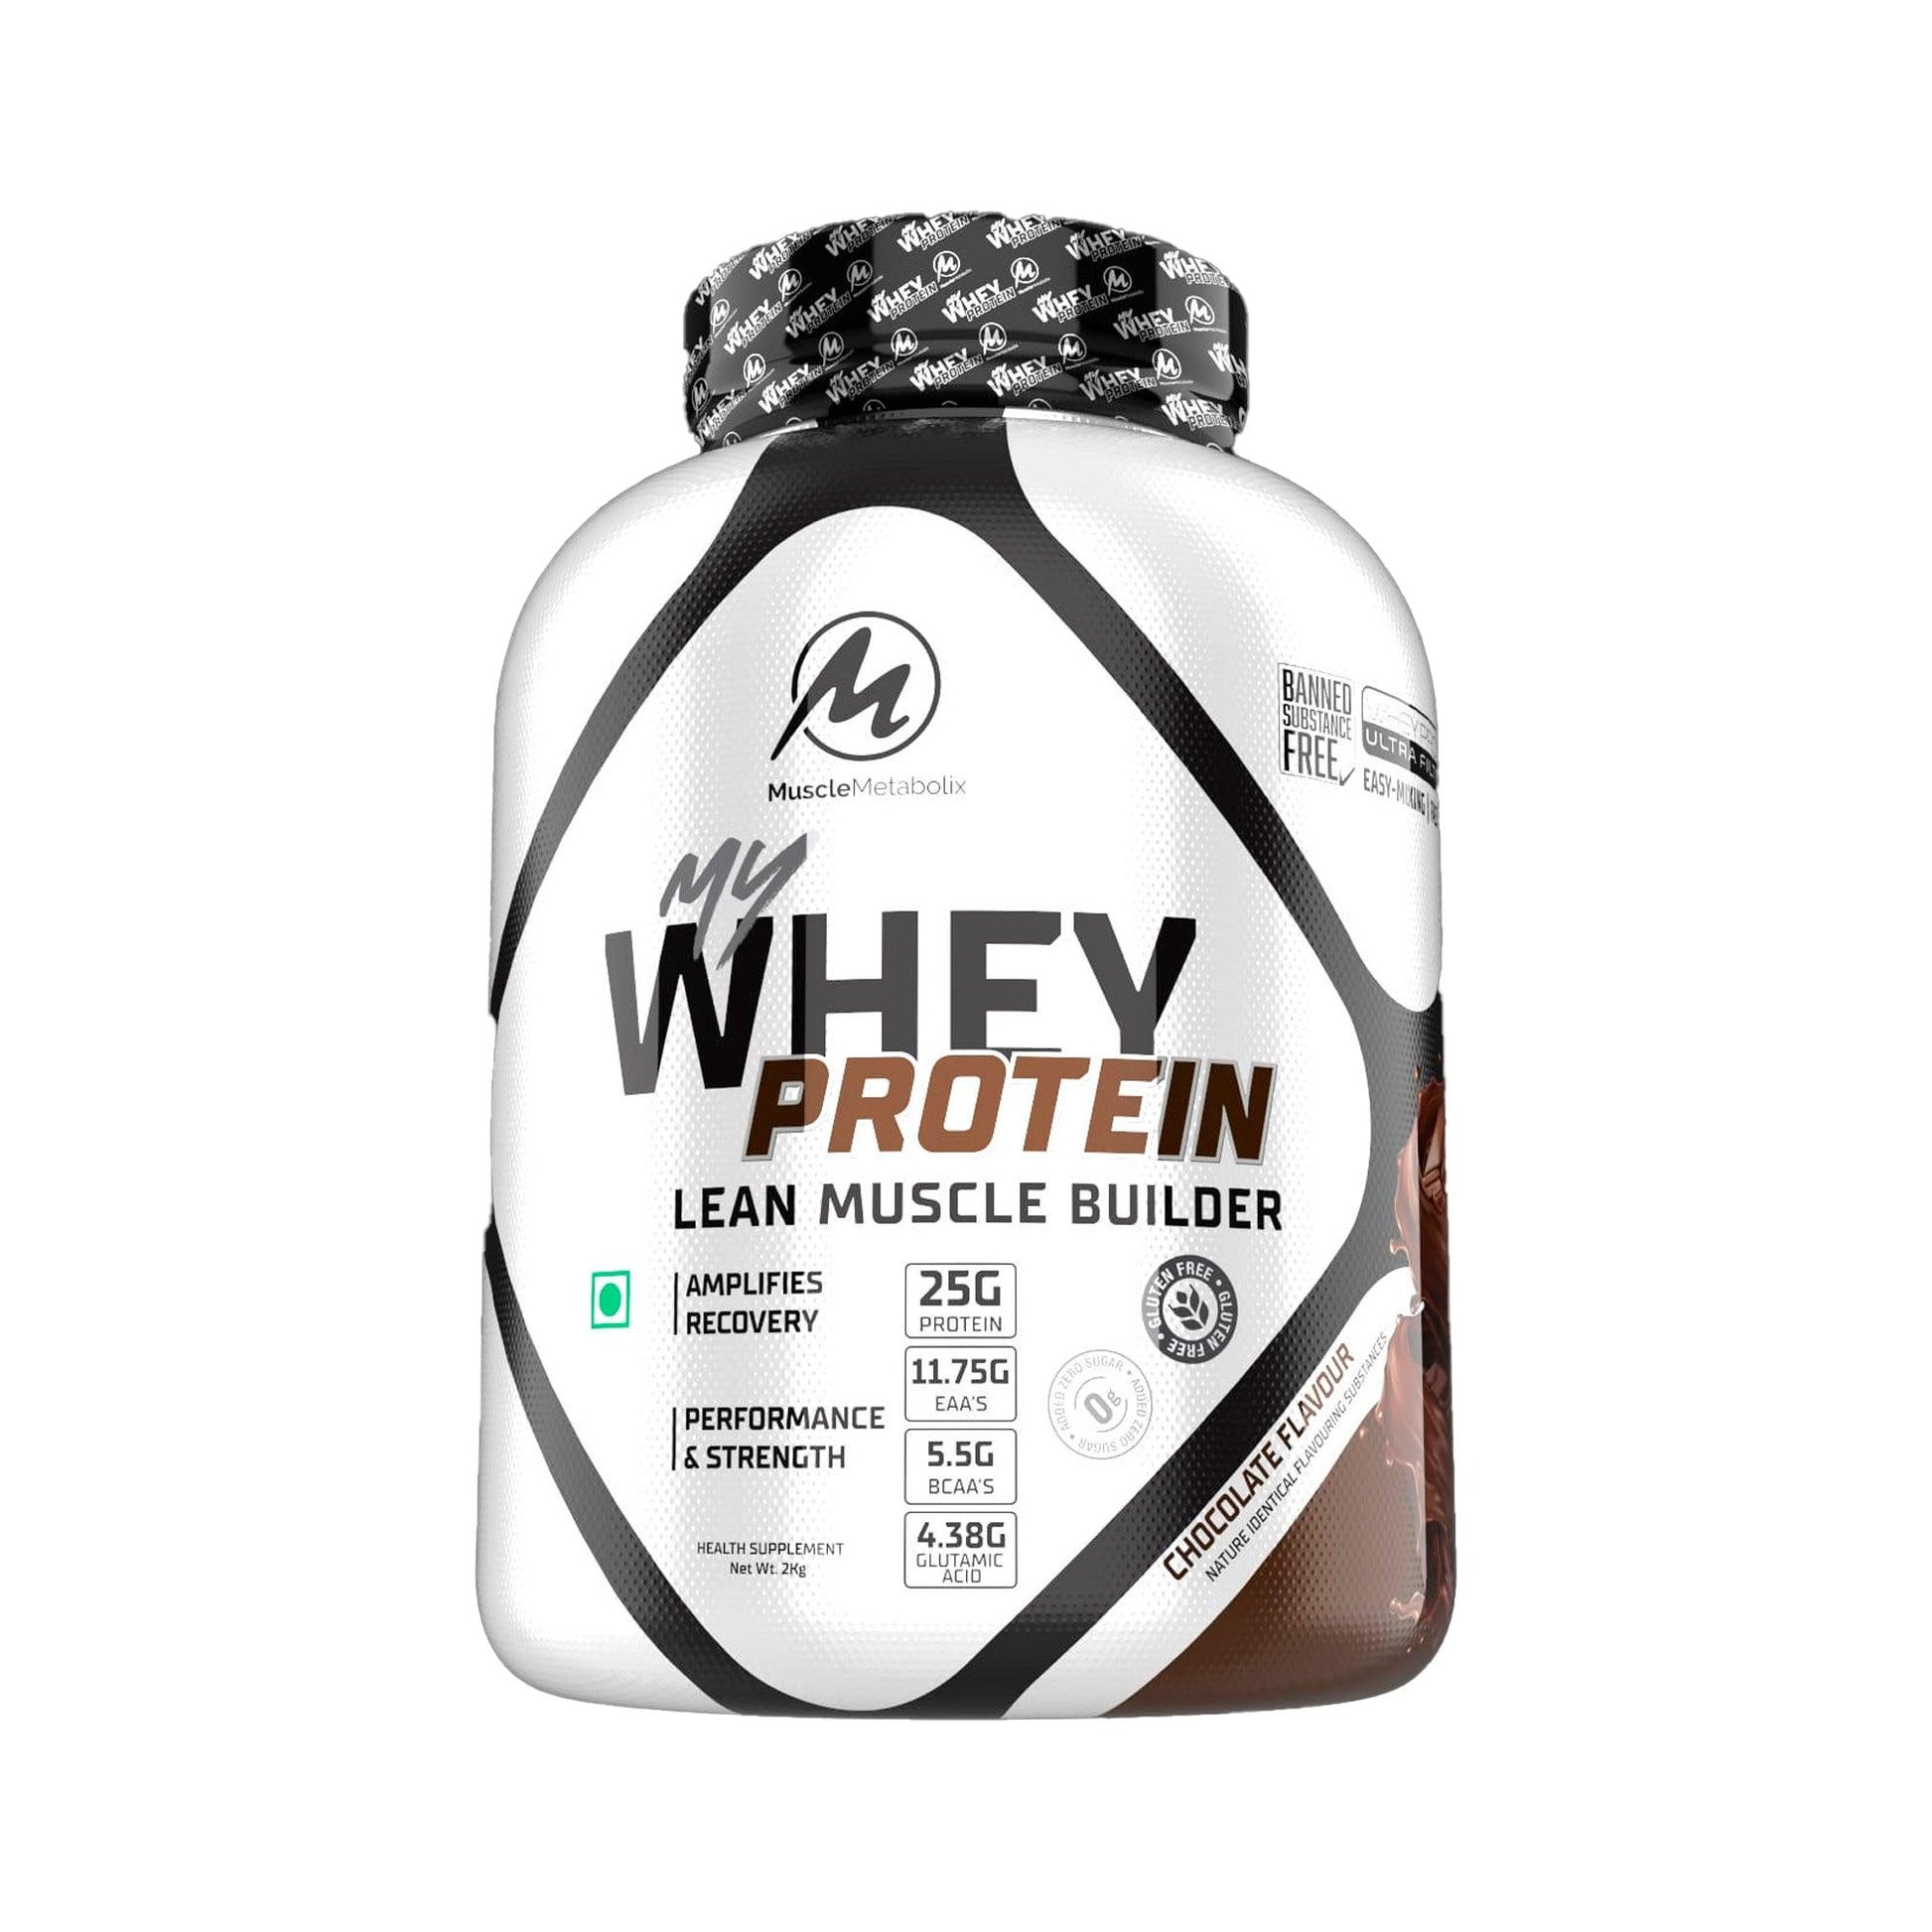 Muscle Metabolix My Whey Protein 2kg (CHOCOLATE) Lean Muscle Builder - The Muscle Kart.com